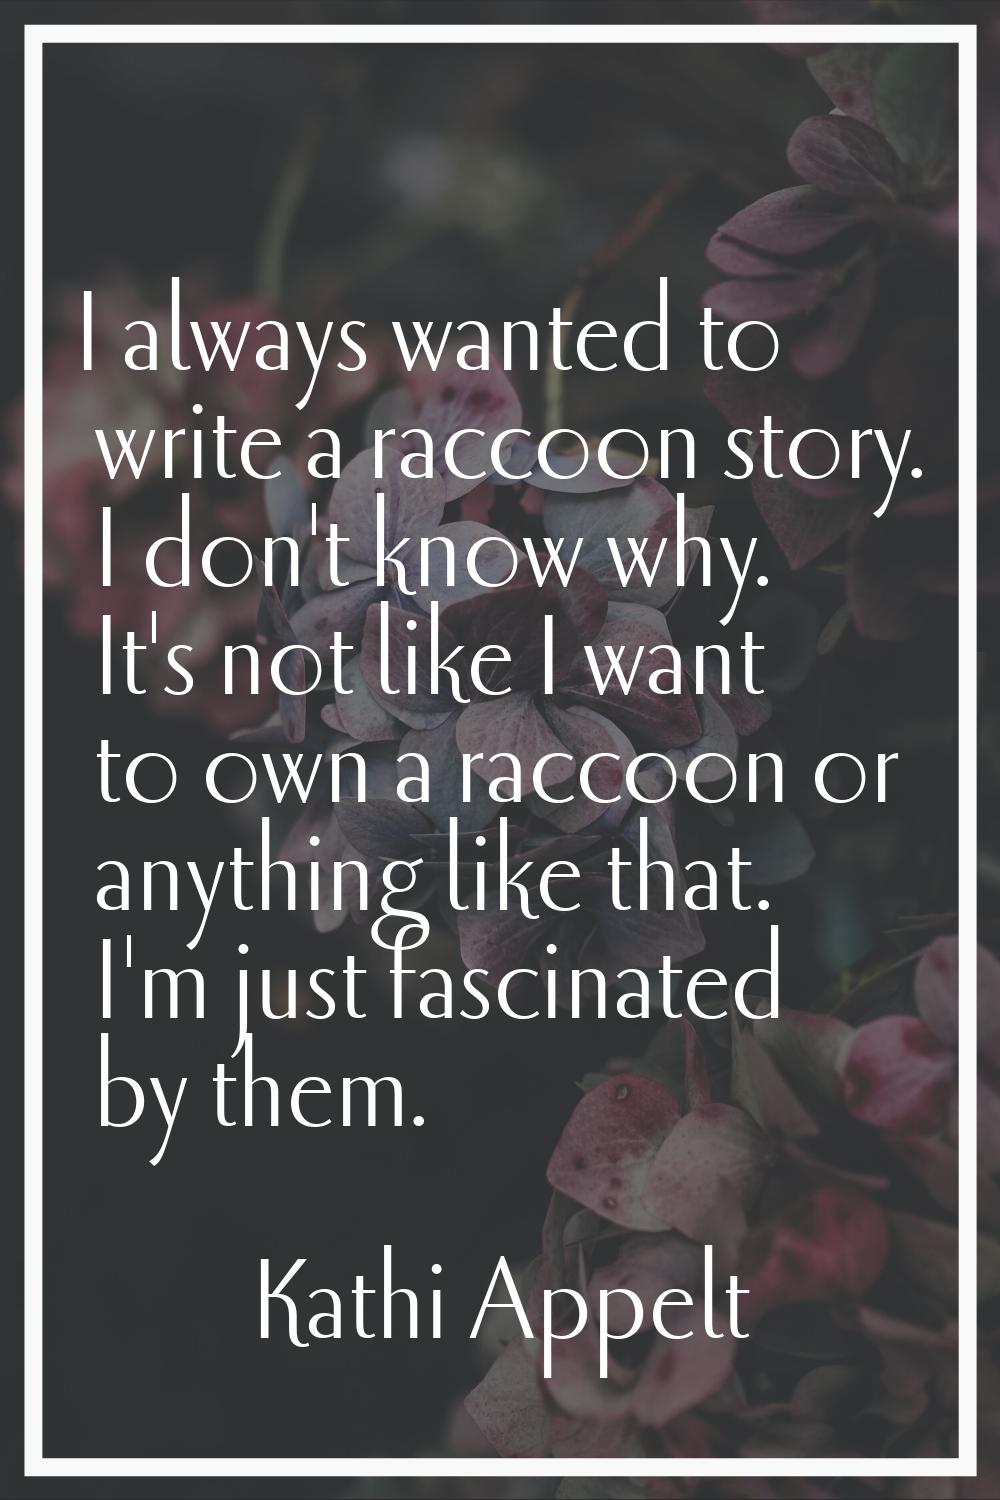 I always wanted to write a raccoon story. I don't know why. It's not like I want to own a raccoon o